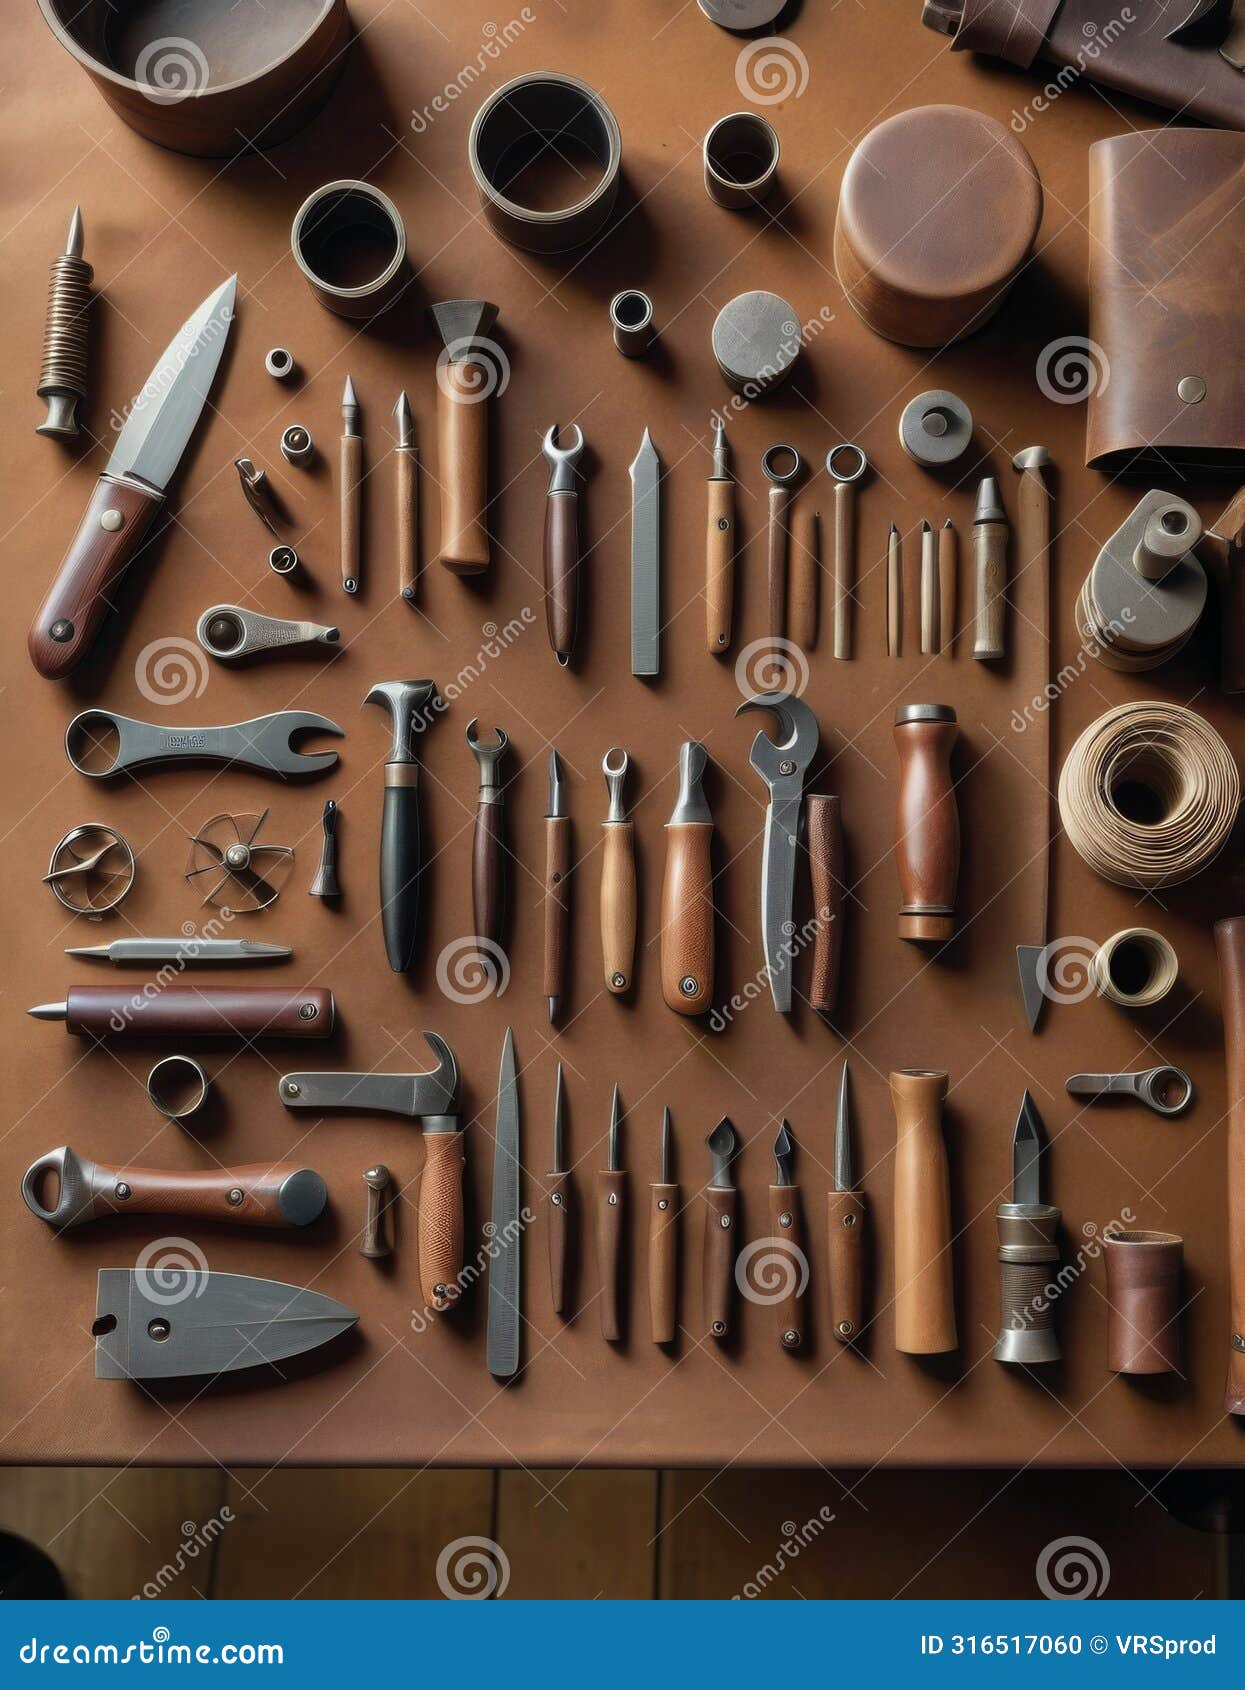 array of craftsmanship tools on wooden surface